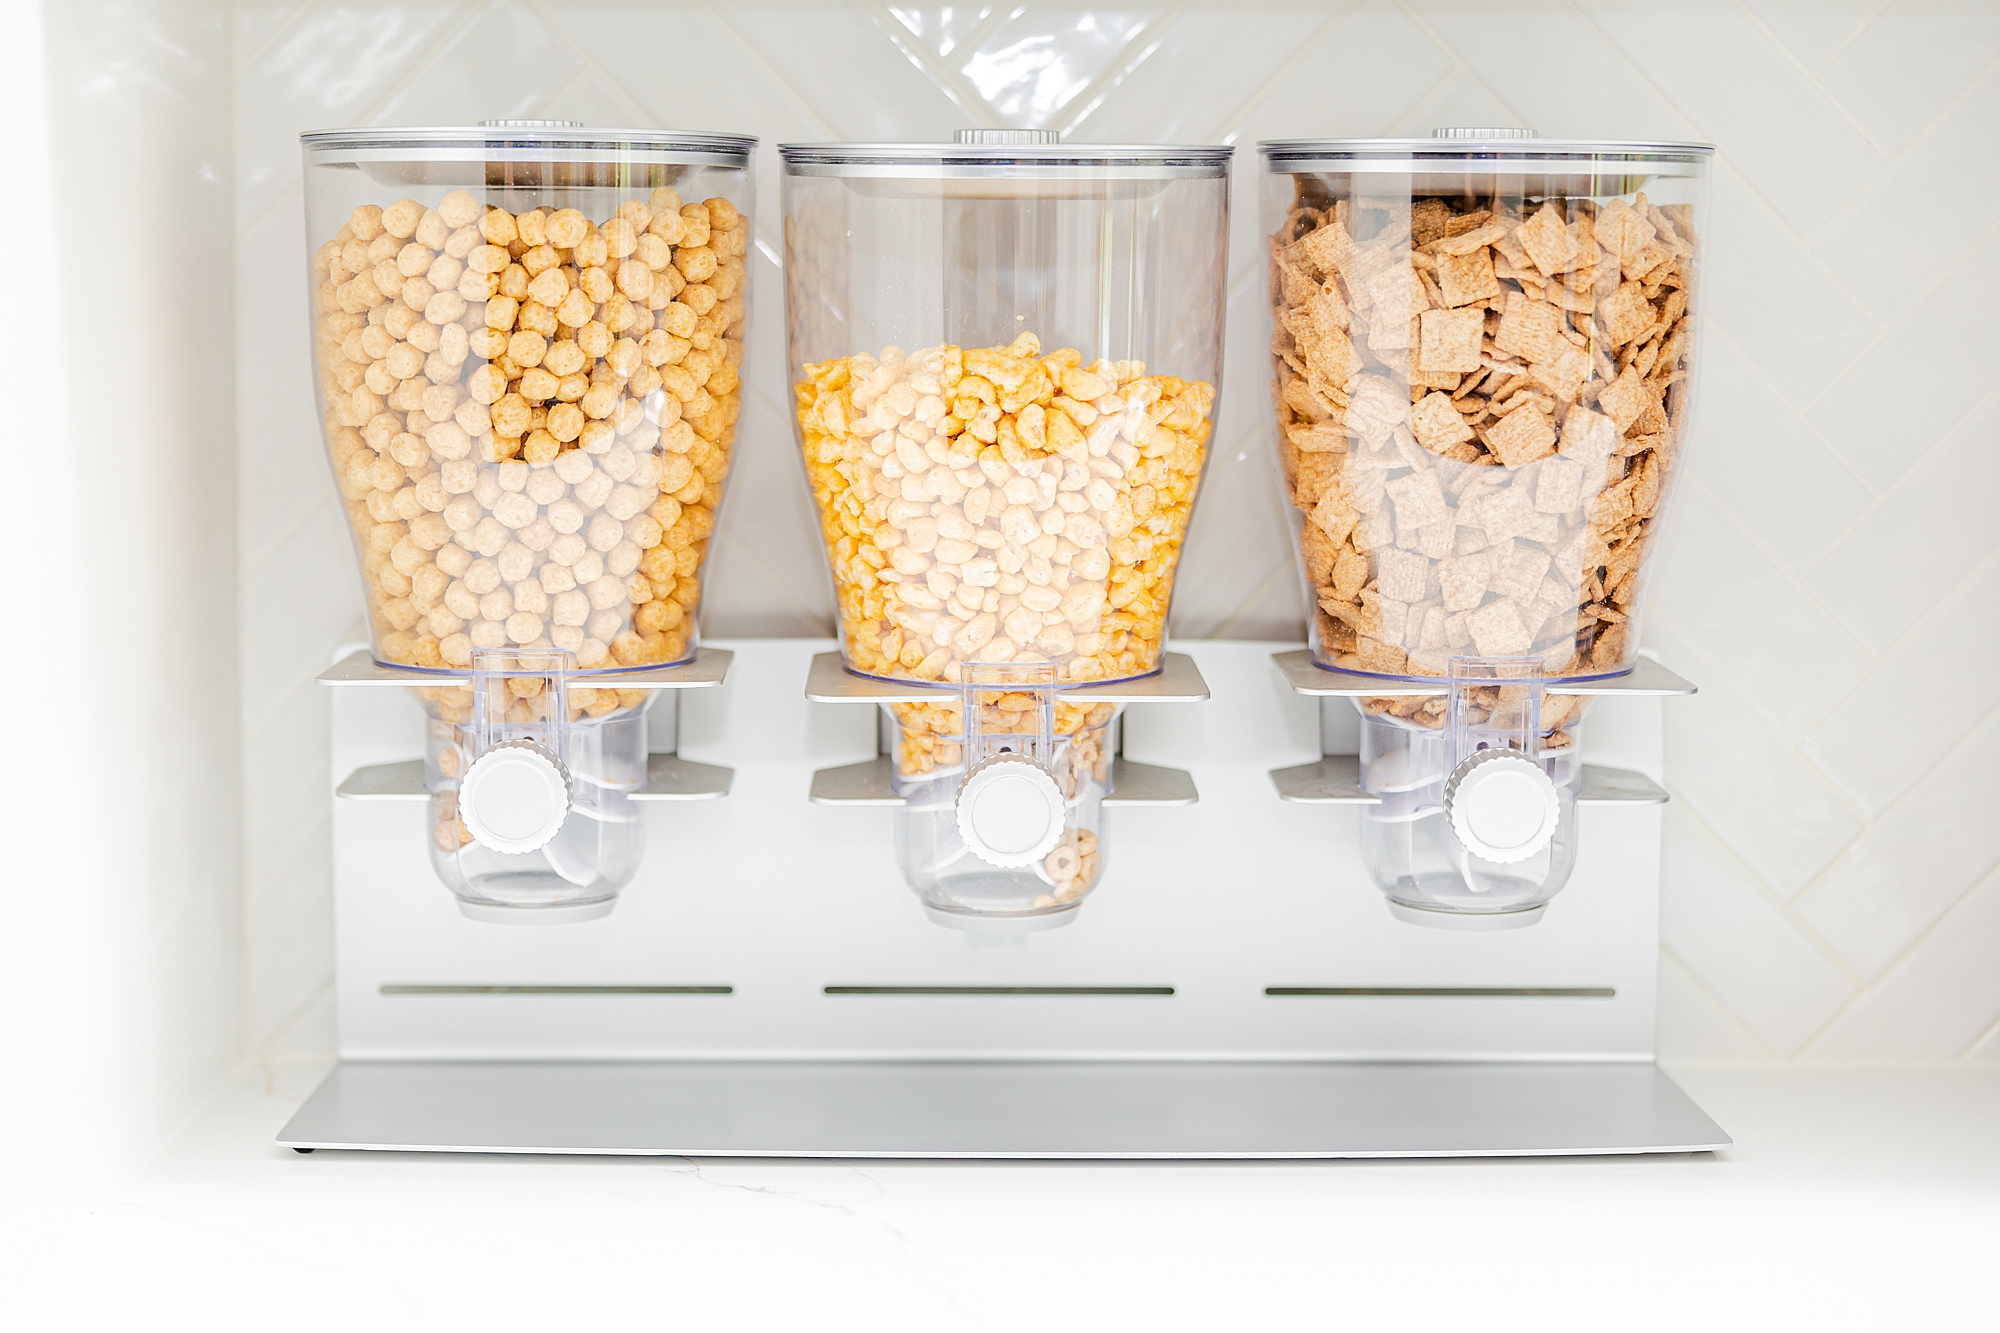 cereal dispensers on counter in custom kitchen 